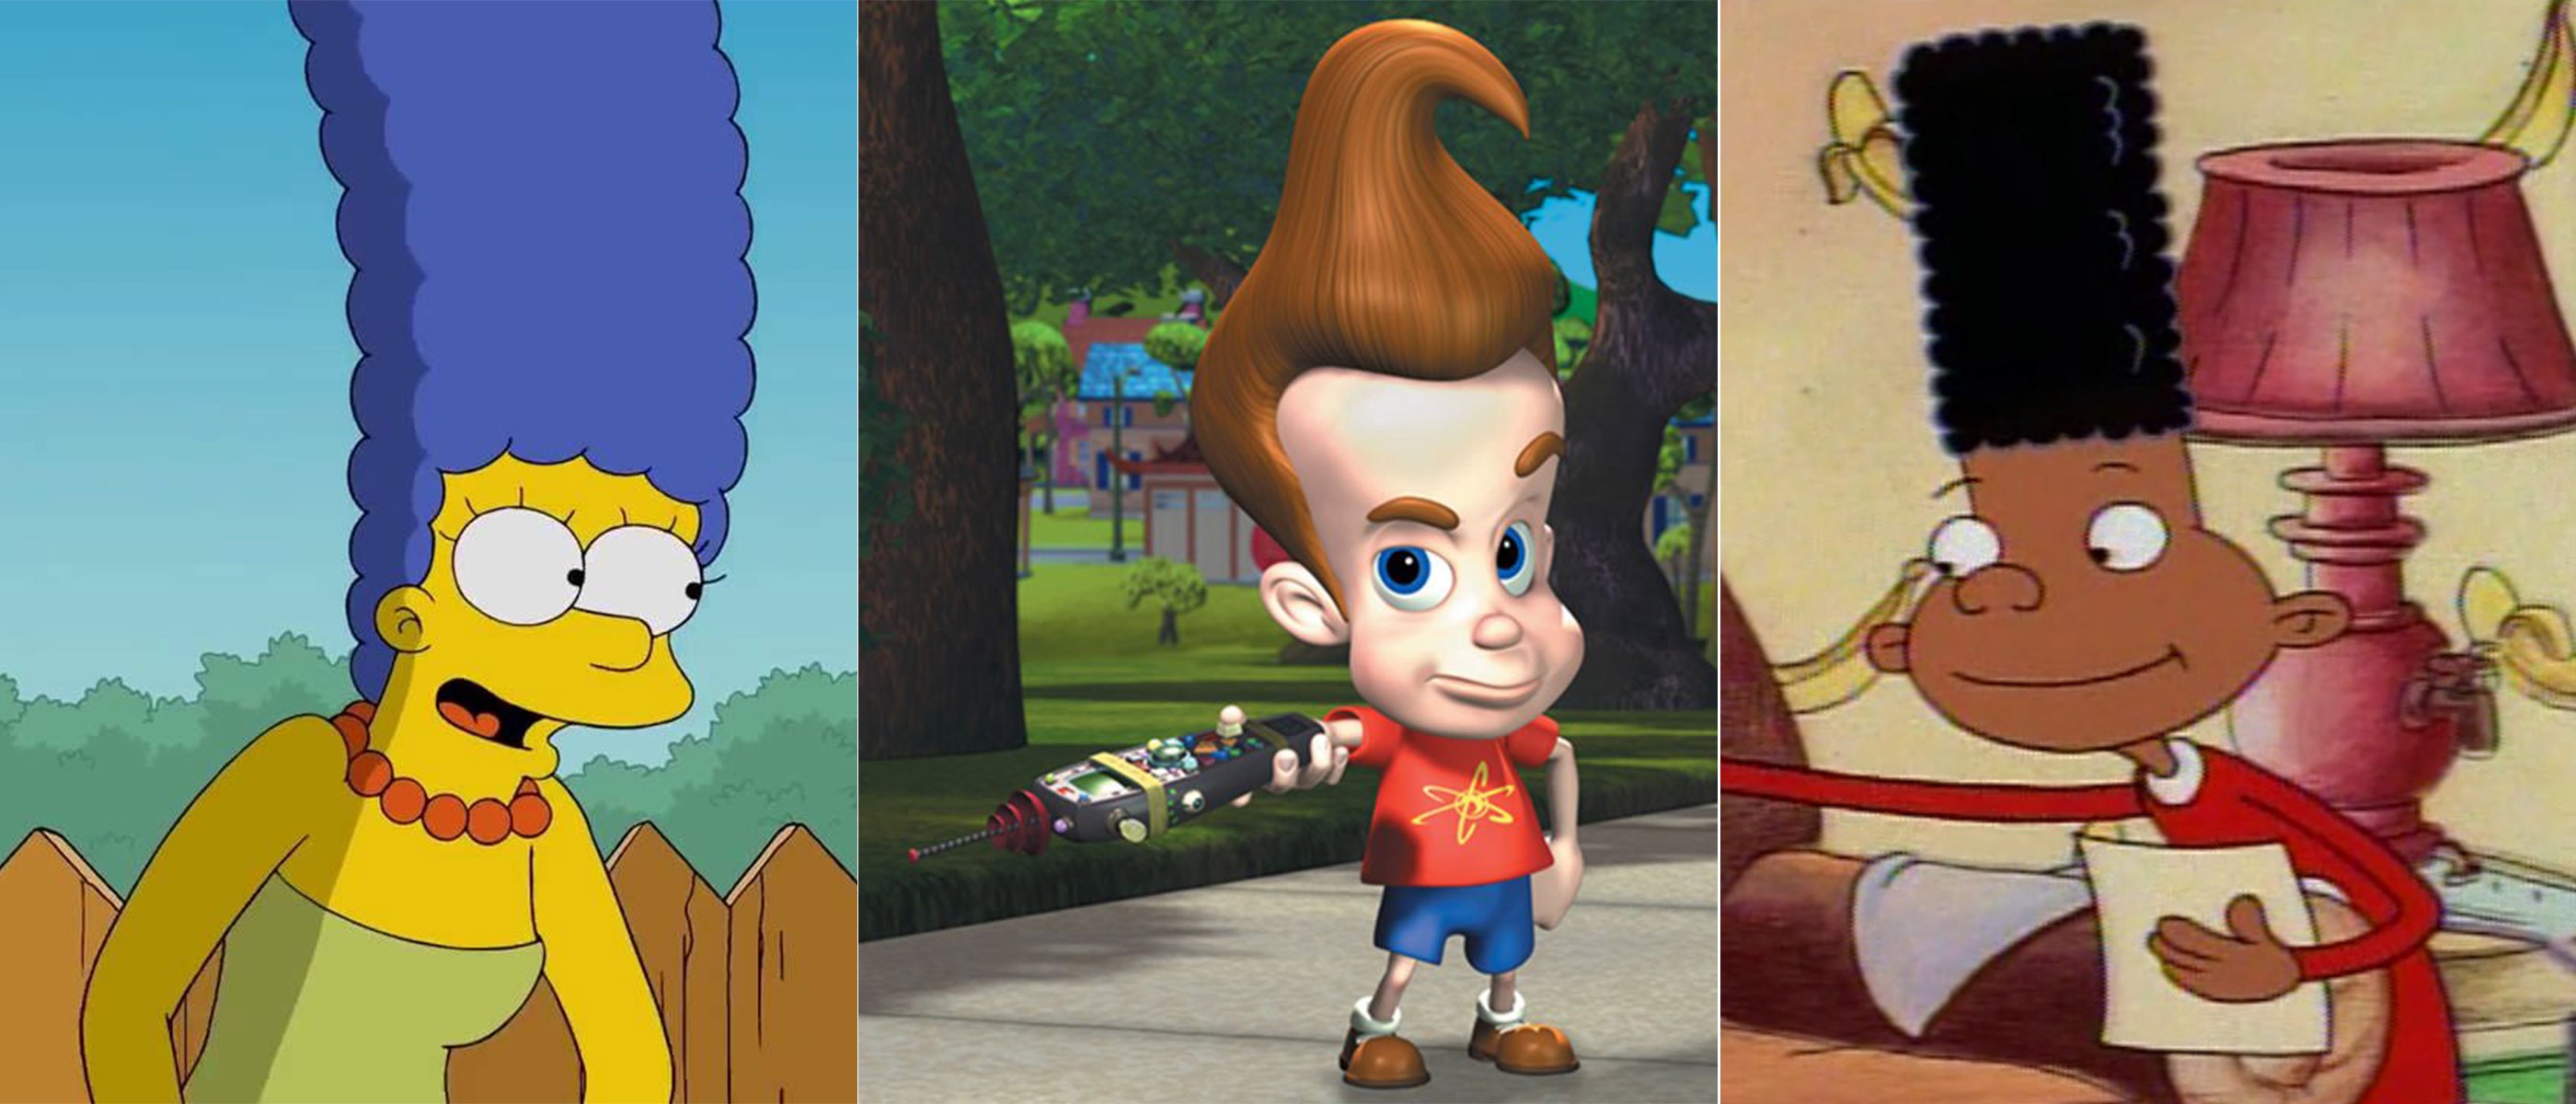 3 Urgent Questions About Hairstyles in Cartoons – The Dot and Line